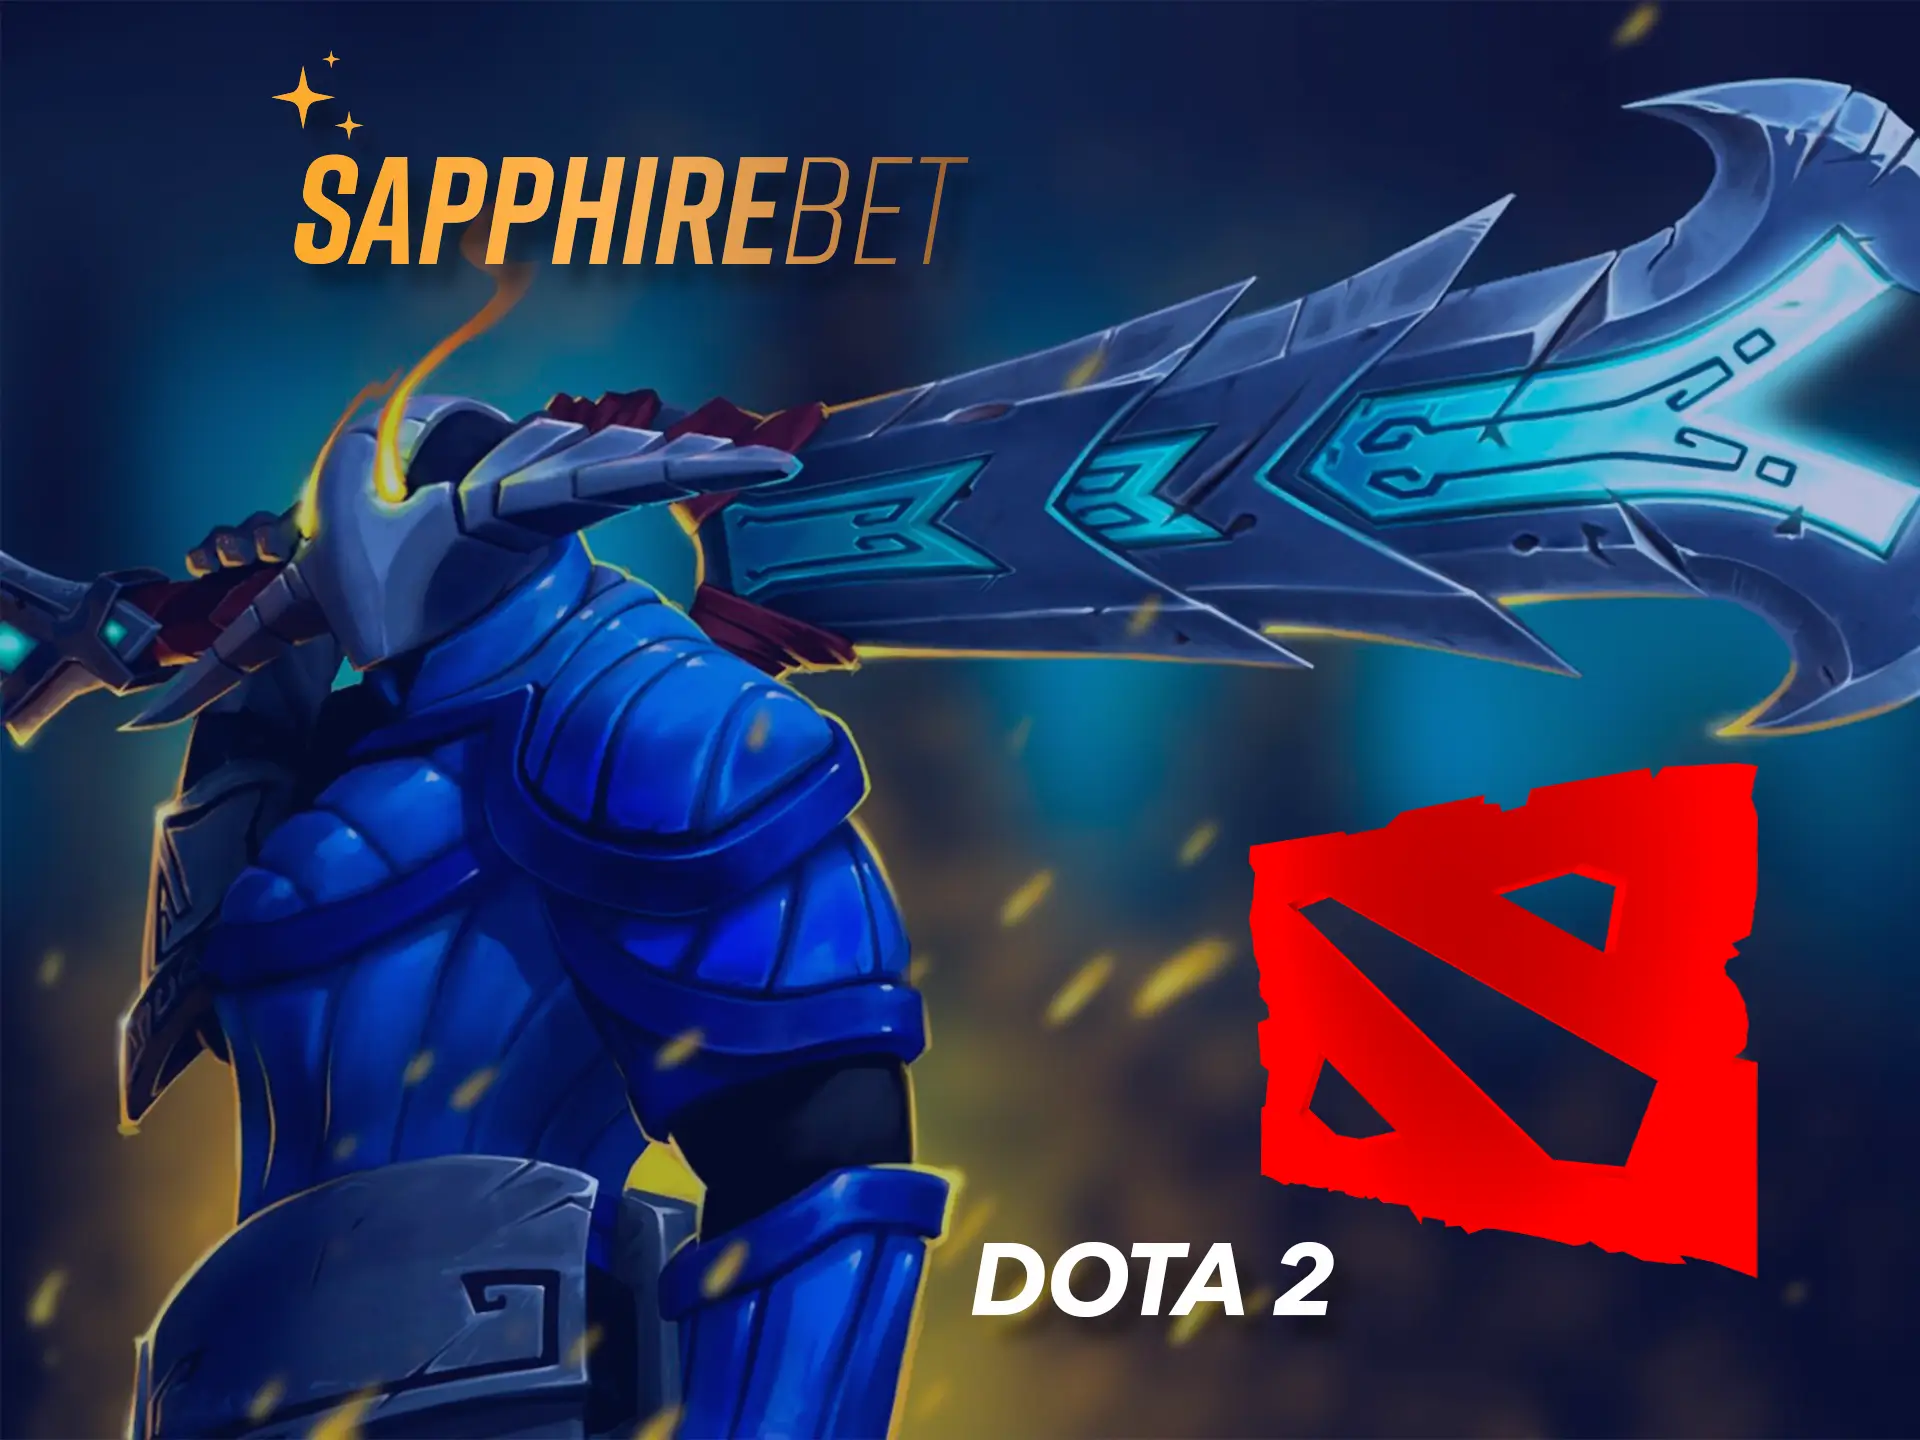 Choose darkness or light and make your prediction at Sapphirebet.